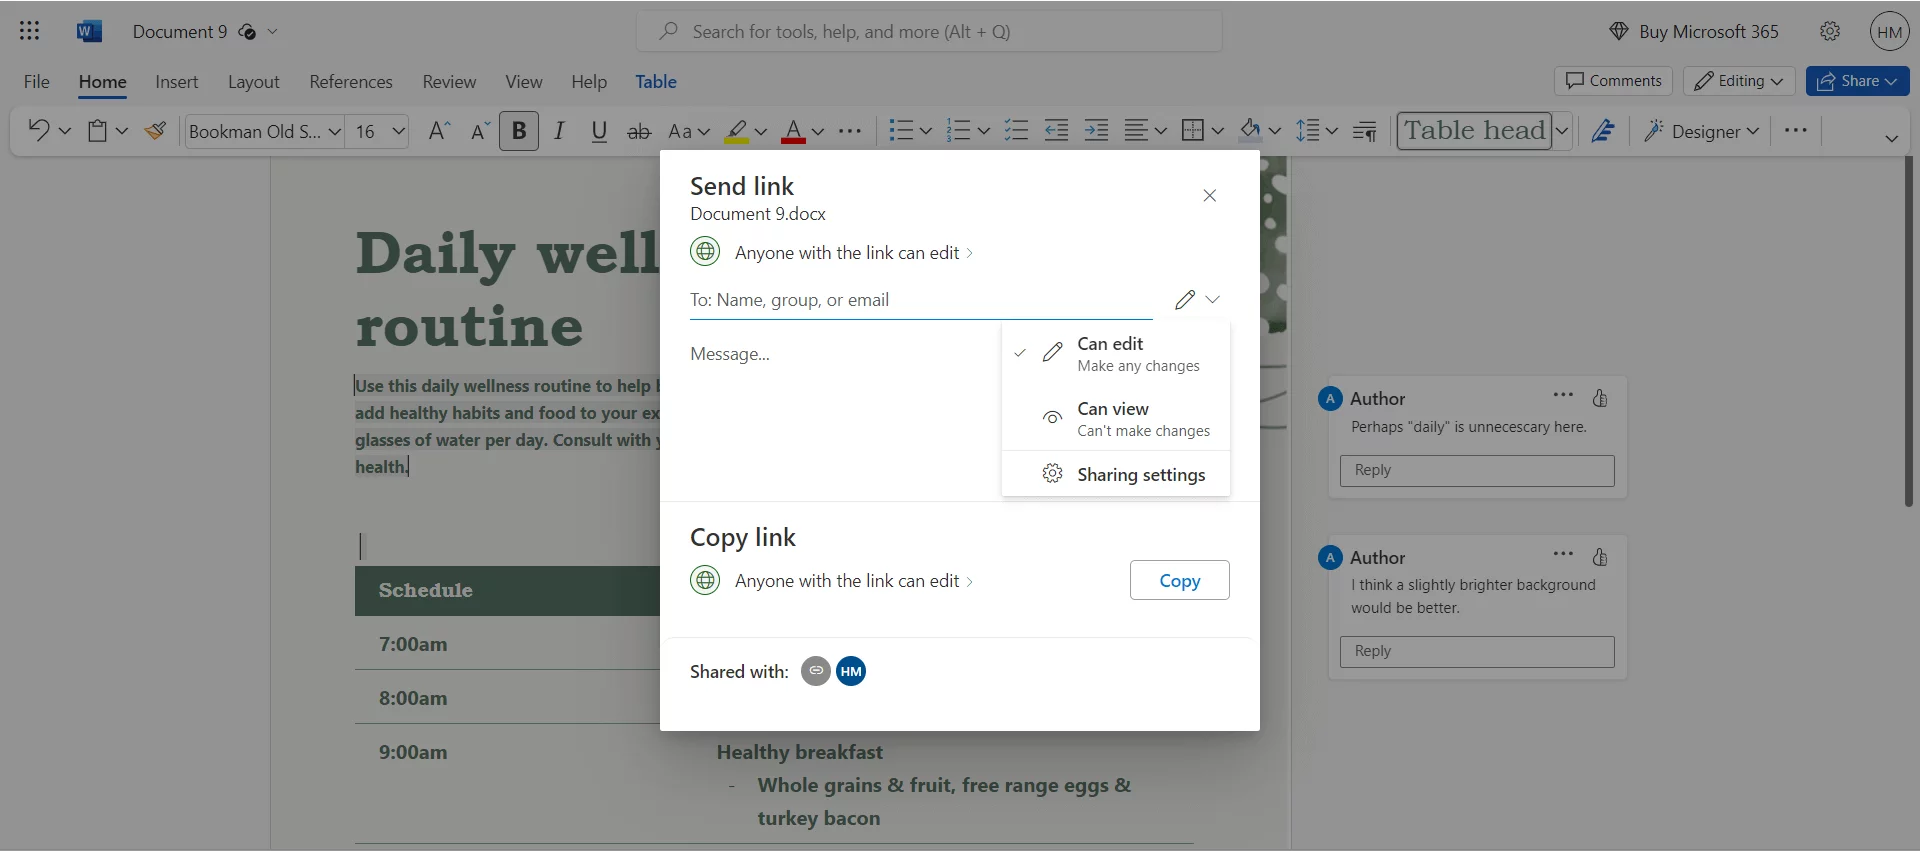 Microsoft Word document with a daily wellness routine, showing the "Send link" sharing options dialog to allow editing or viewing access.